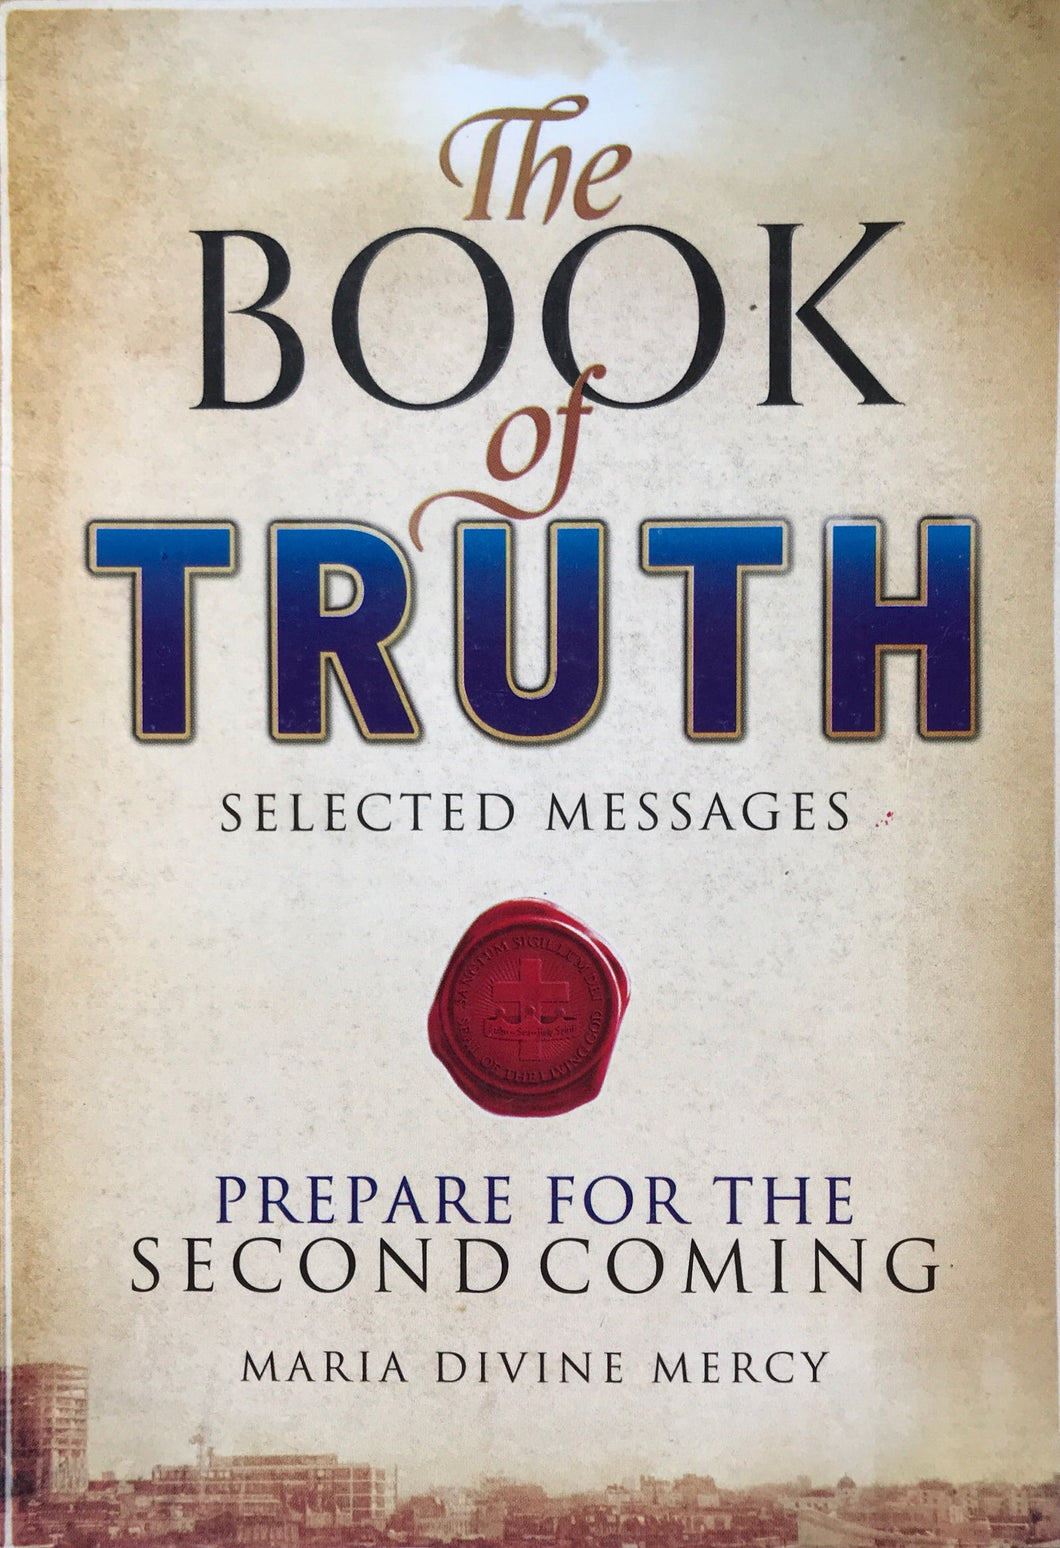 Selected Messages from the Book of Truth